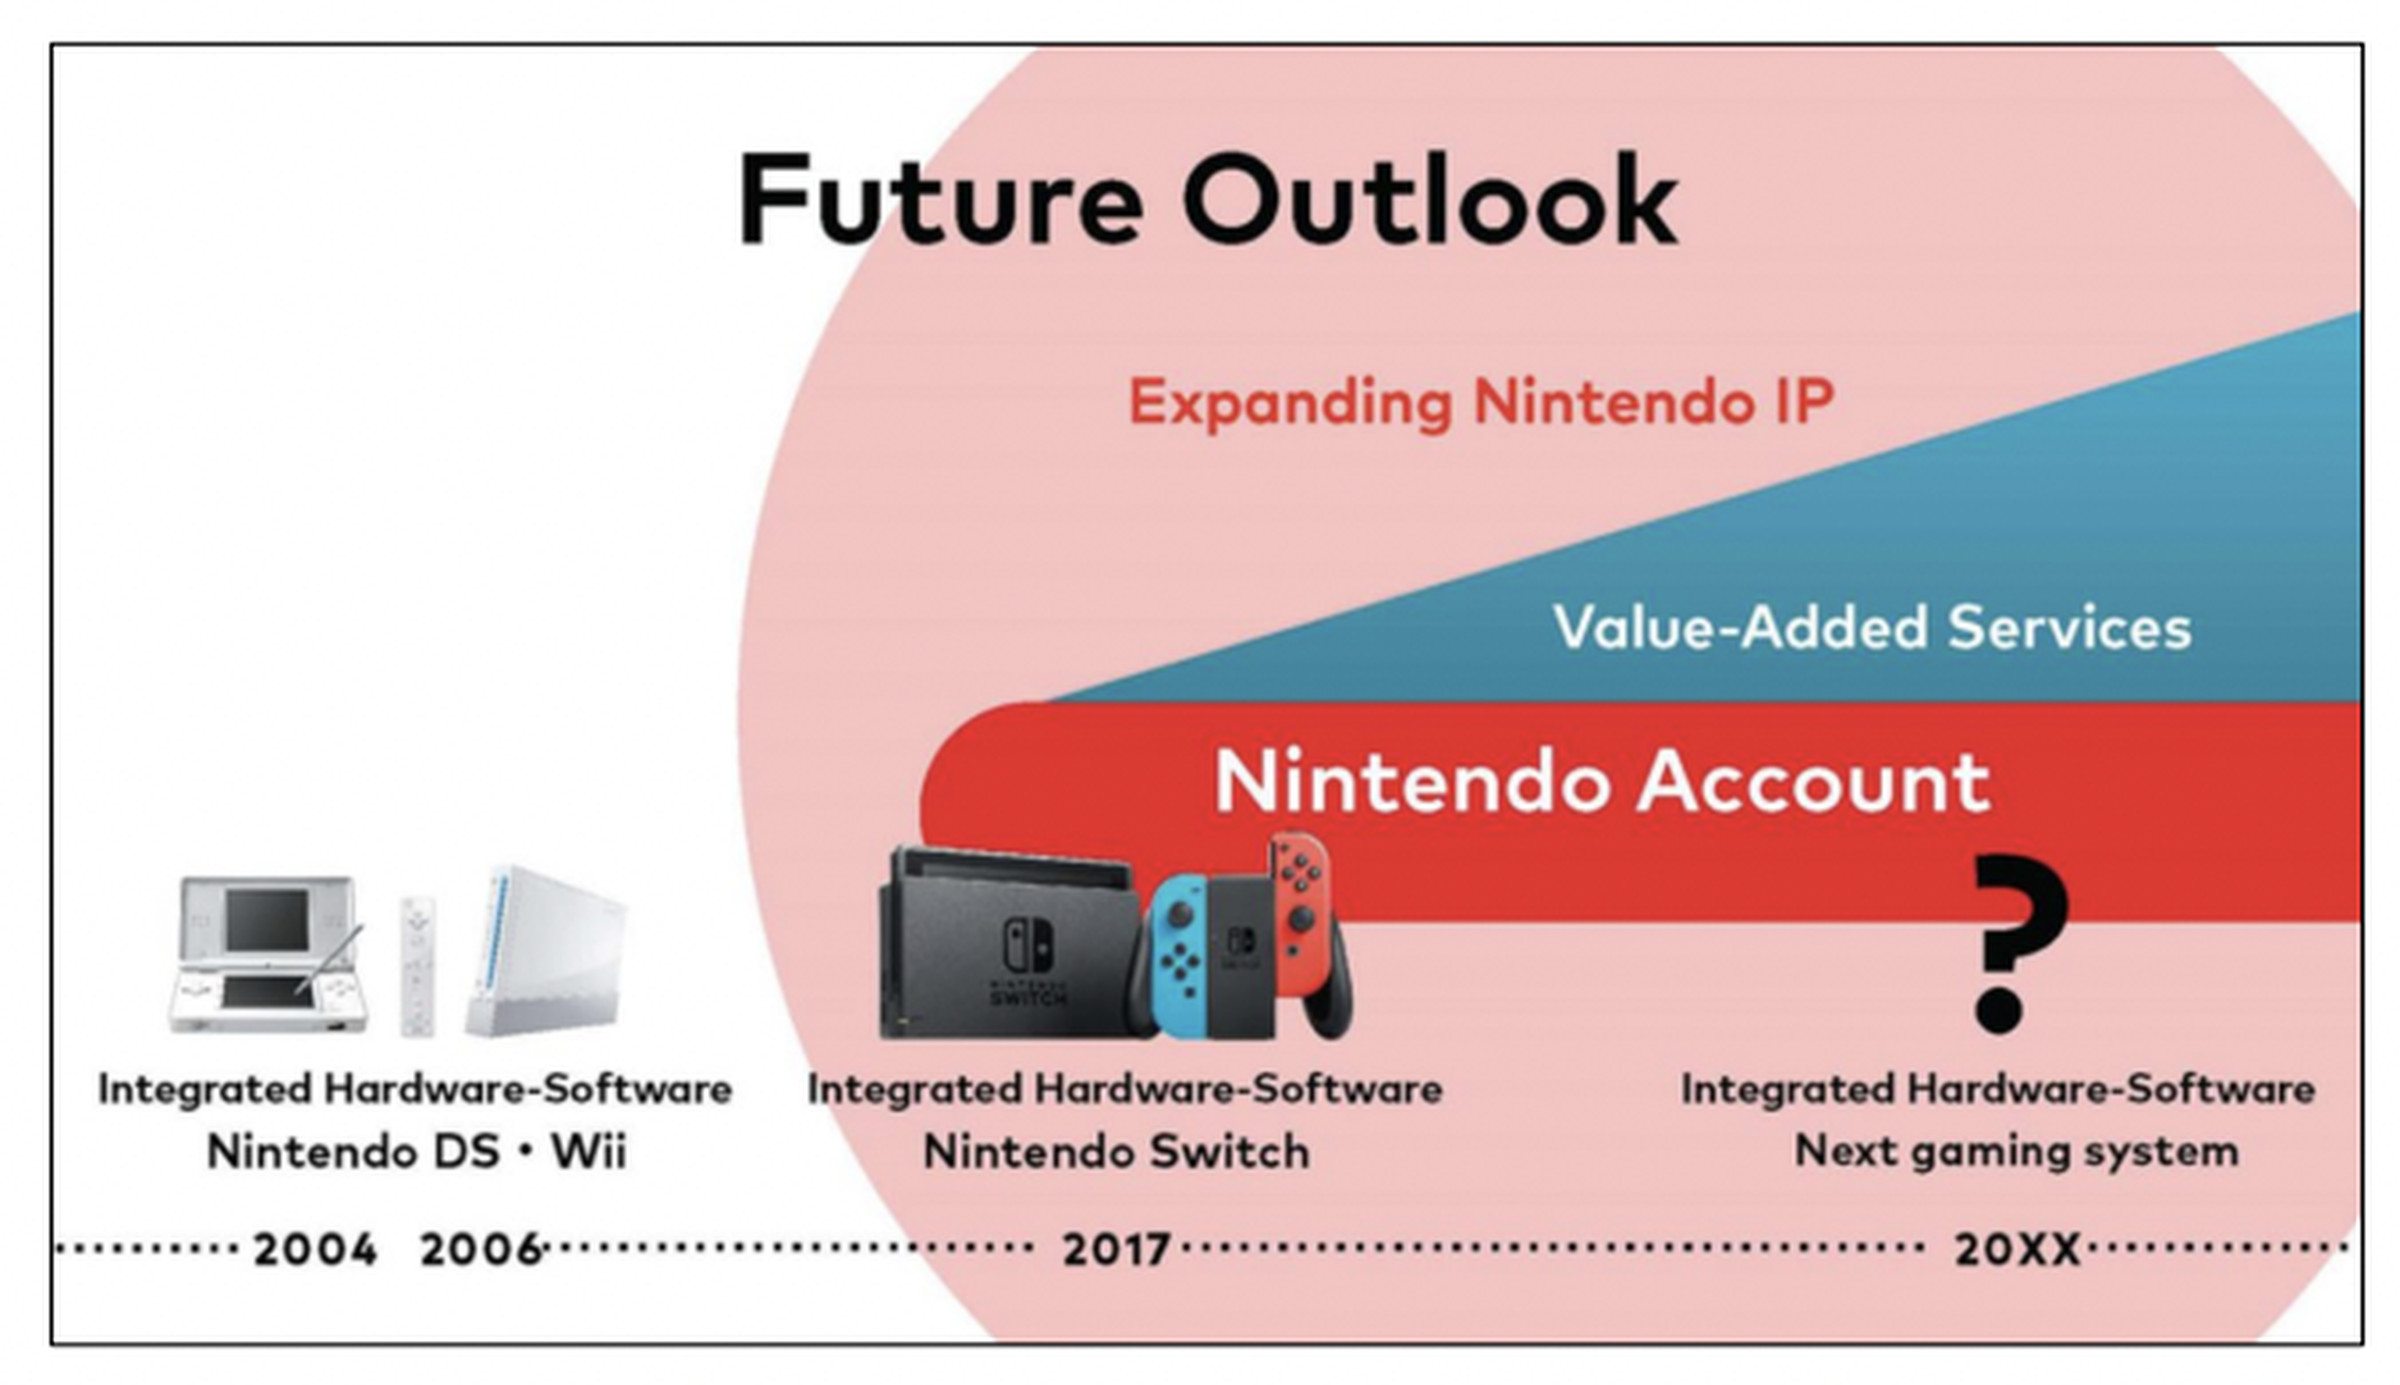 Even Nintendo wants you to forget the Wii U, which released in 2012 and isn’t included on this timeline.